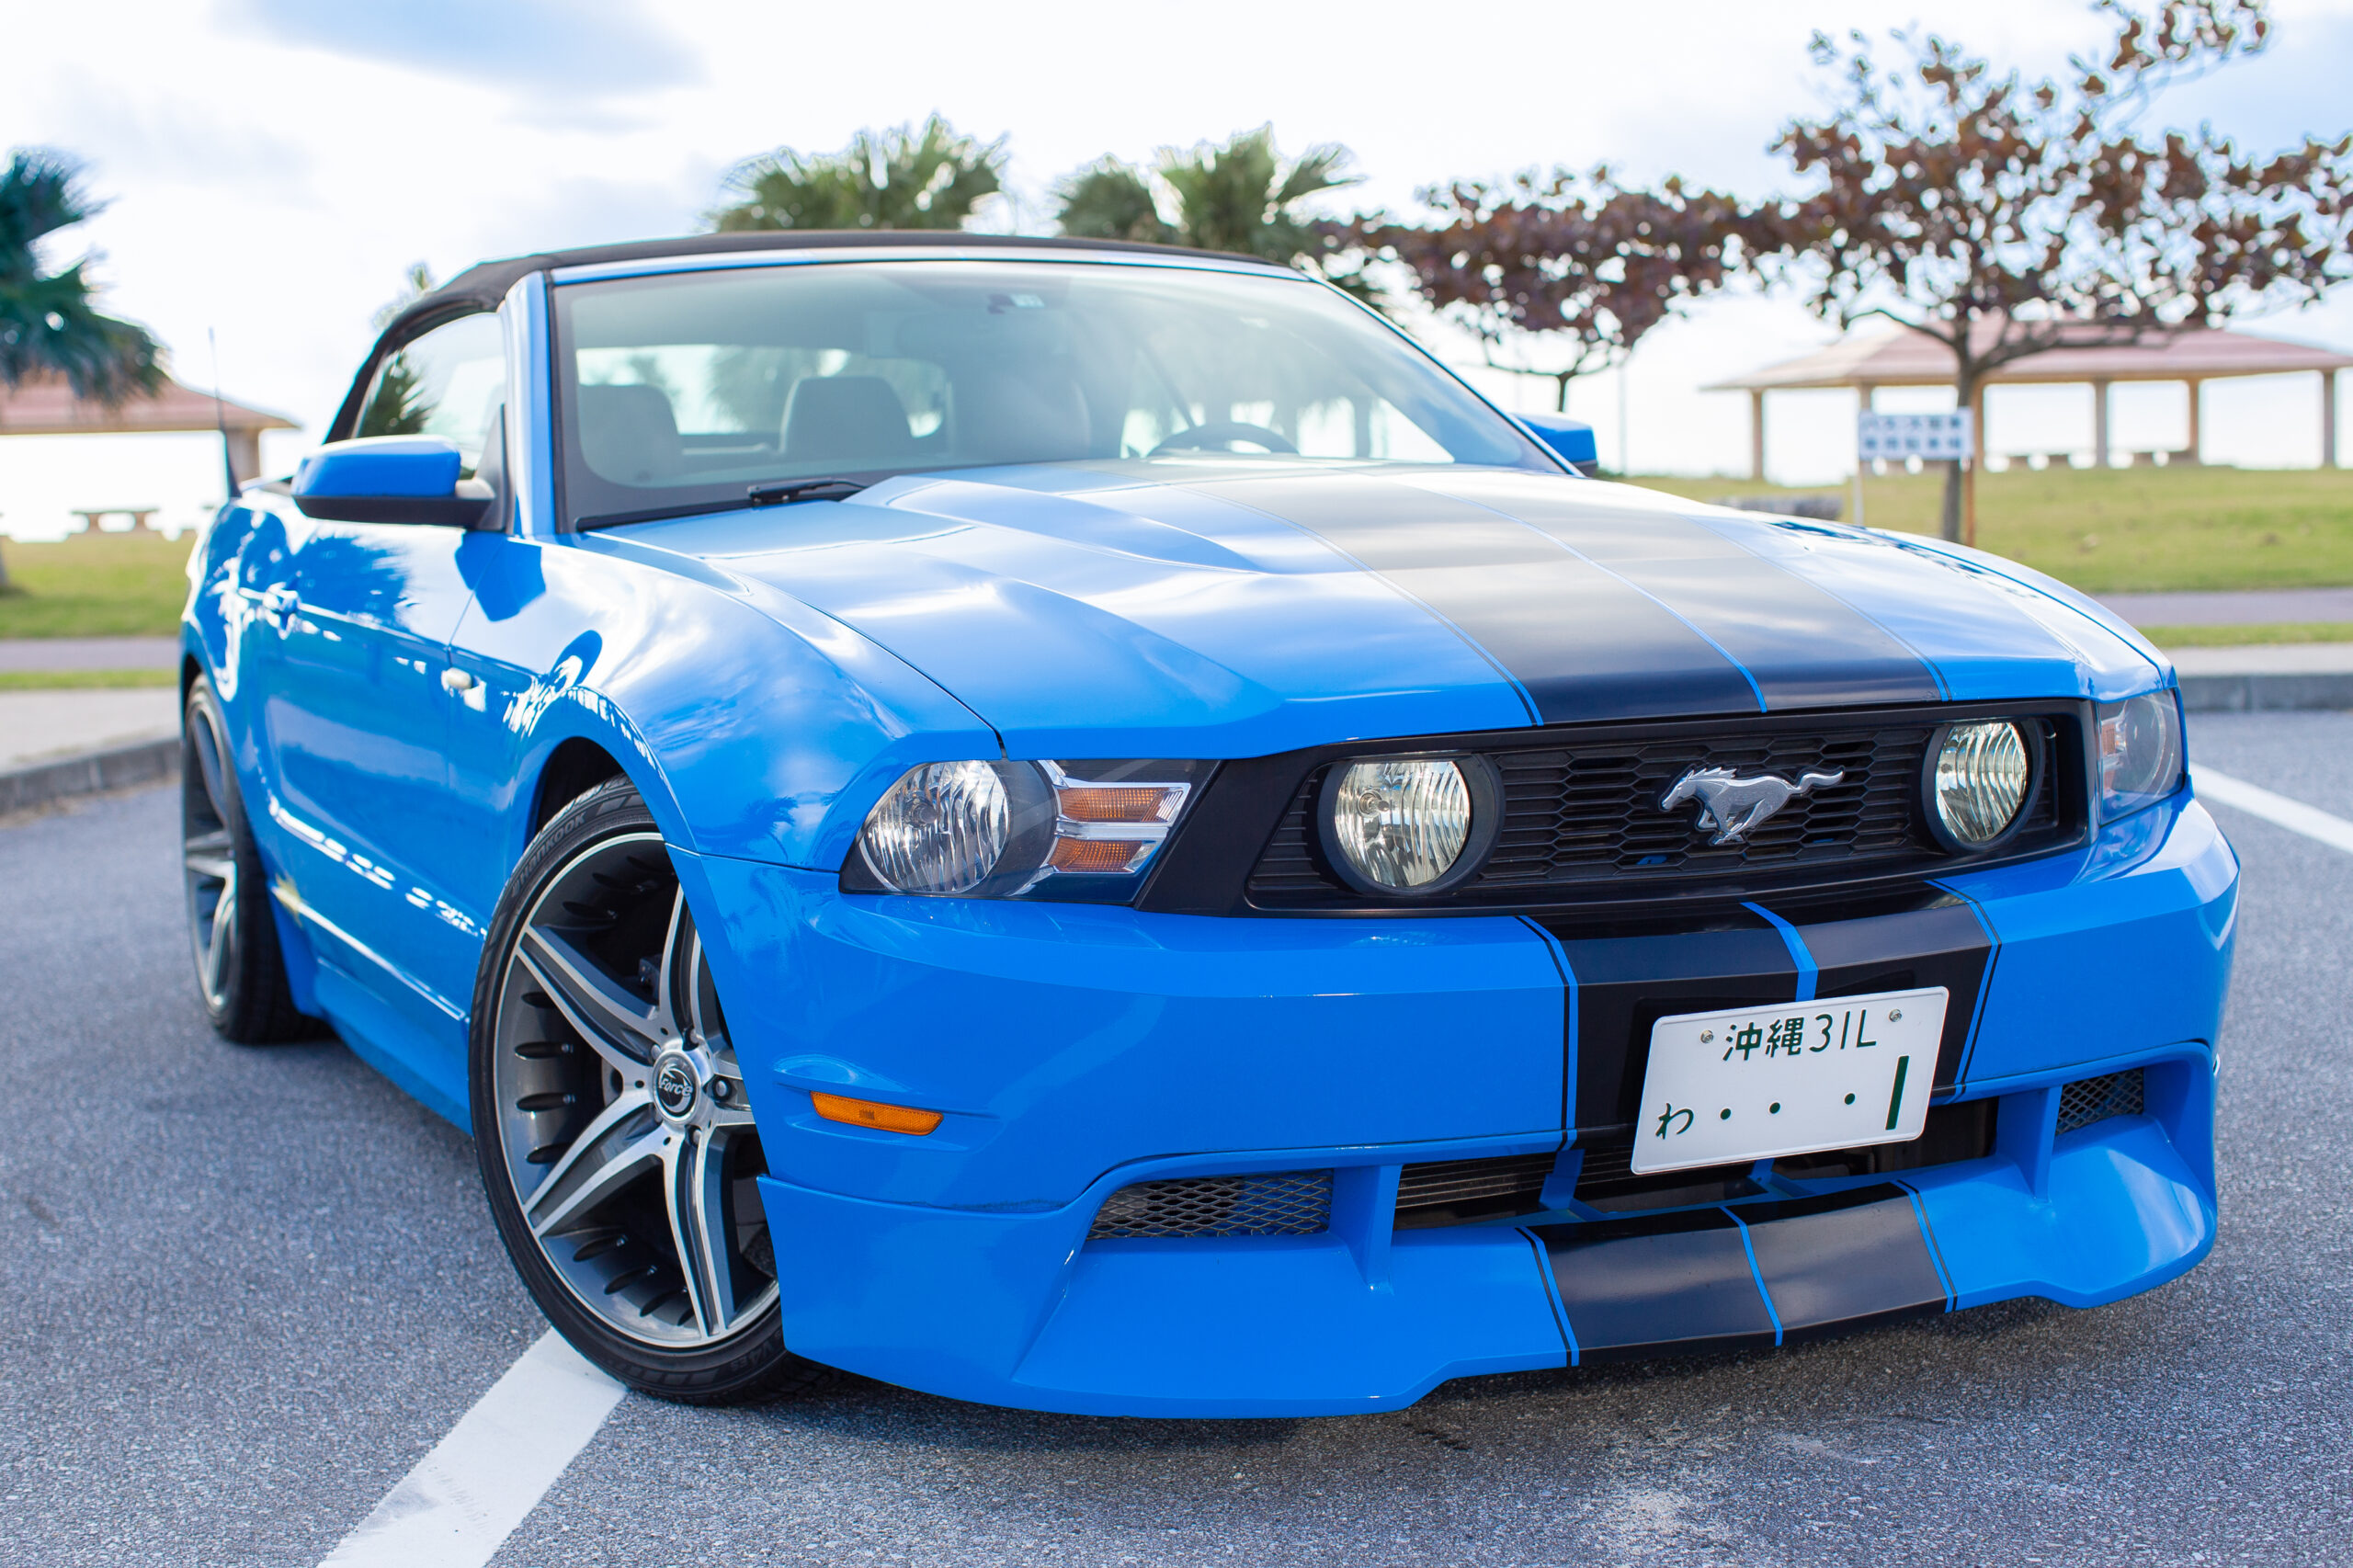 Ford Mustang Convertible 6th (Minor change edition) Blue